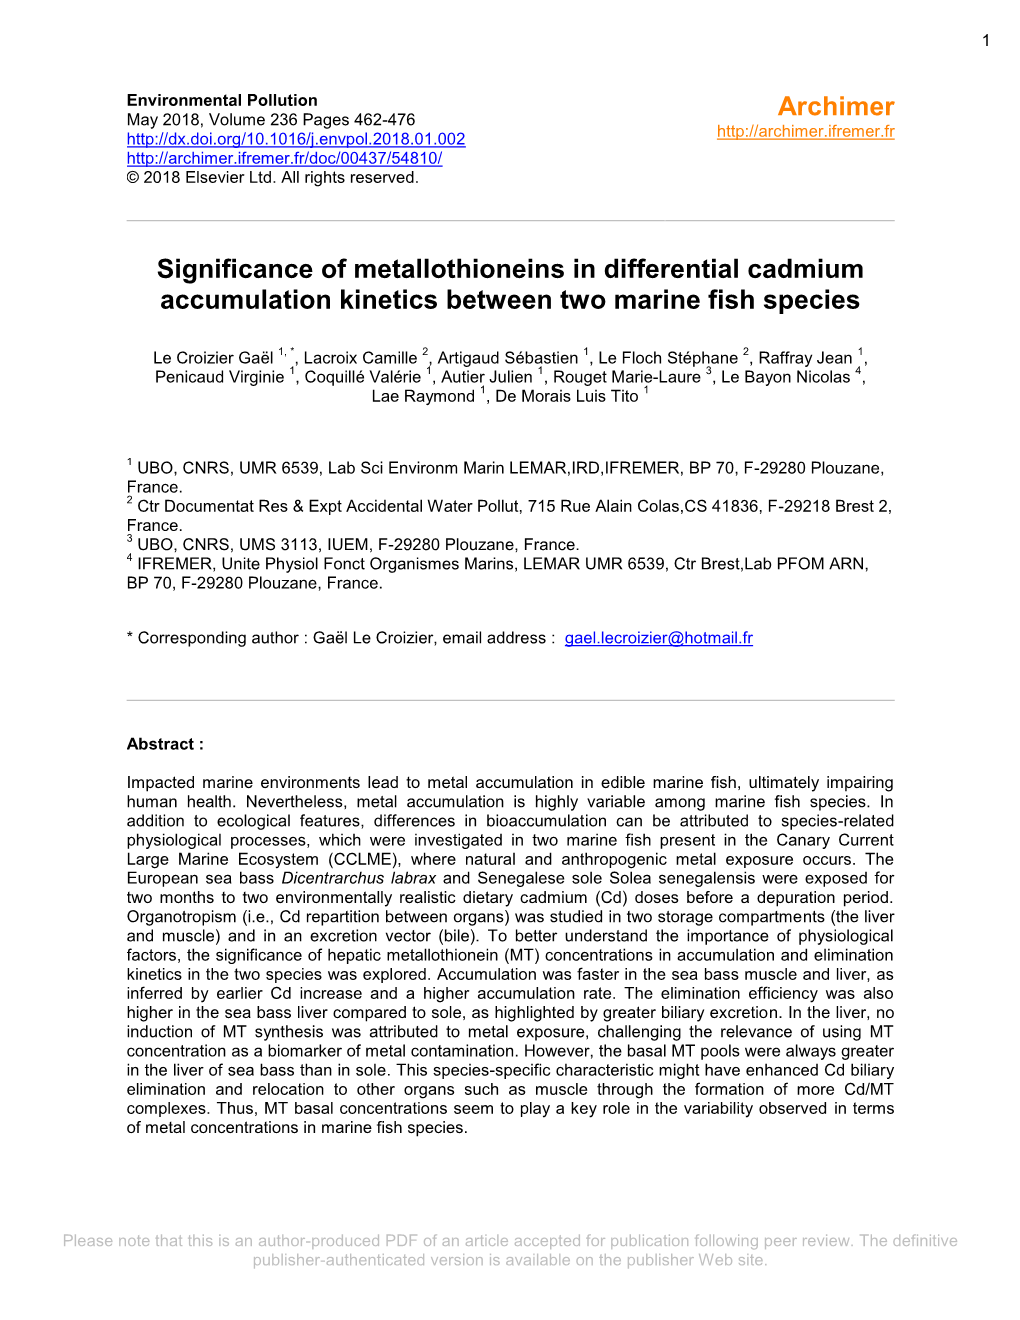 Significance of Metallothioneins in Differential Cadmium Accumulation Kinetics Between Two Marine Fish Species